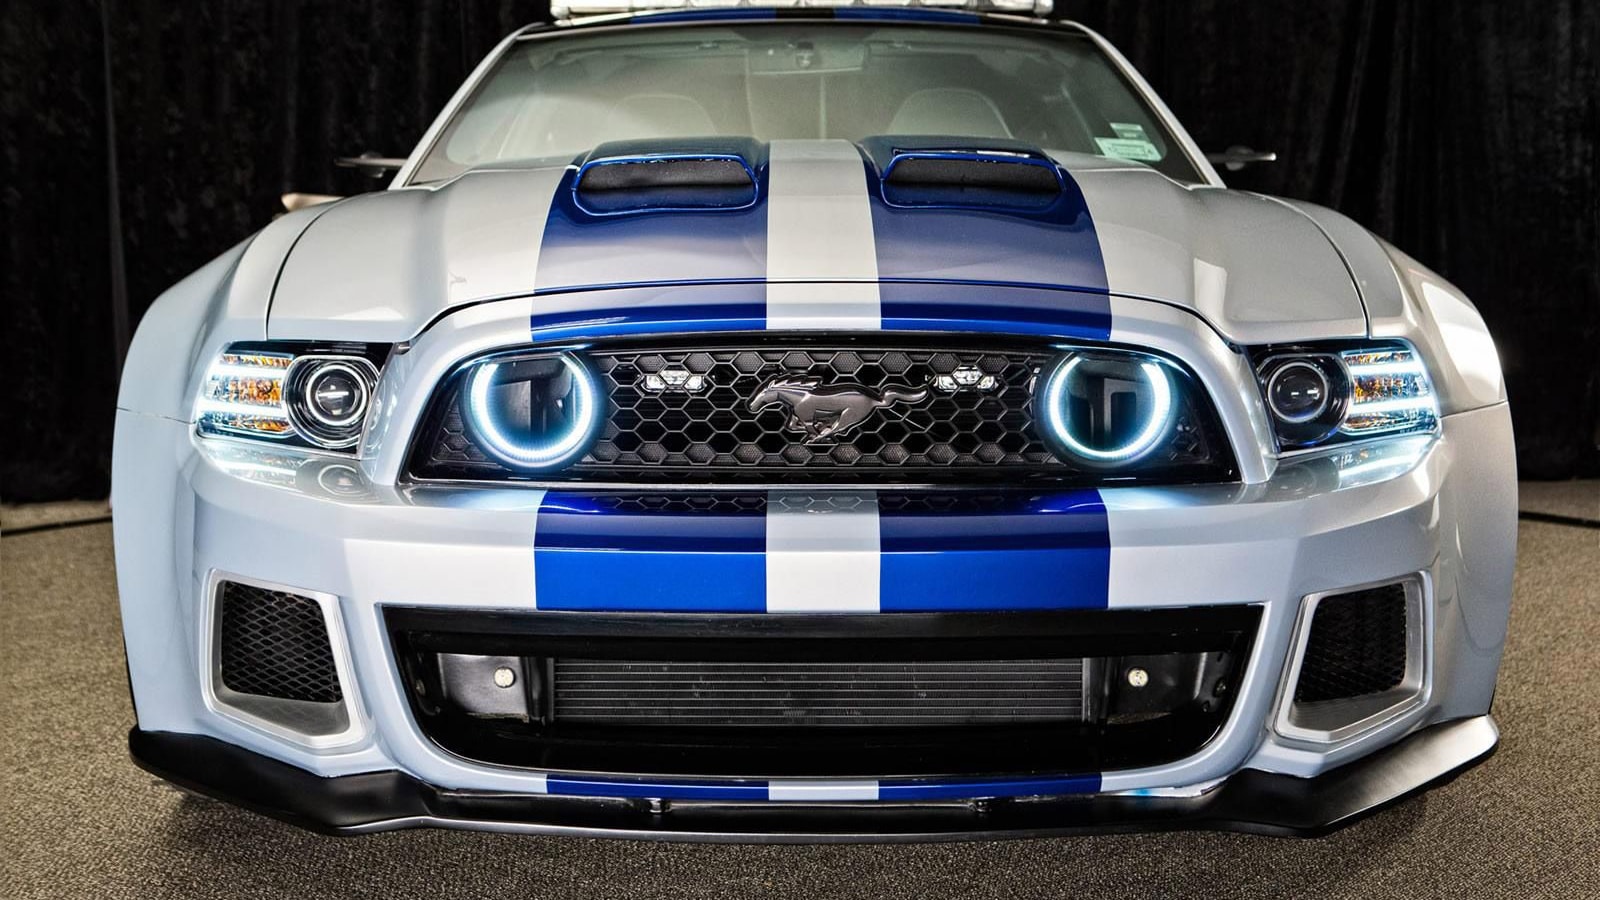 Ford Mustang from ‘Need For Speed’ movie serves as NASCAR pace car